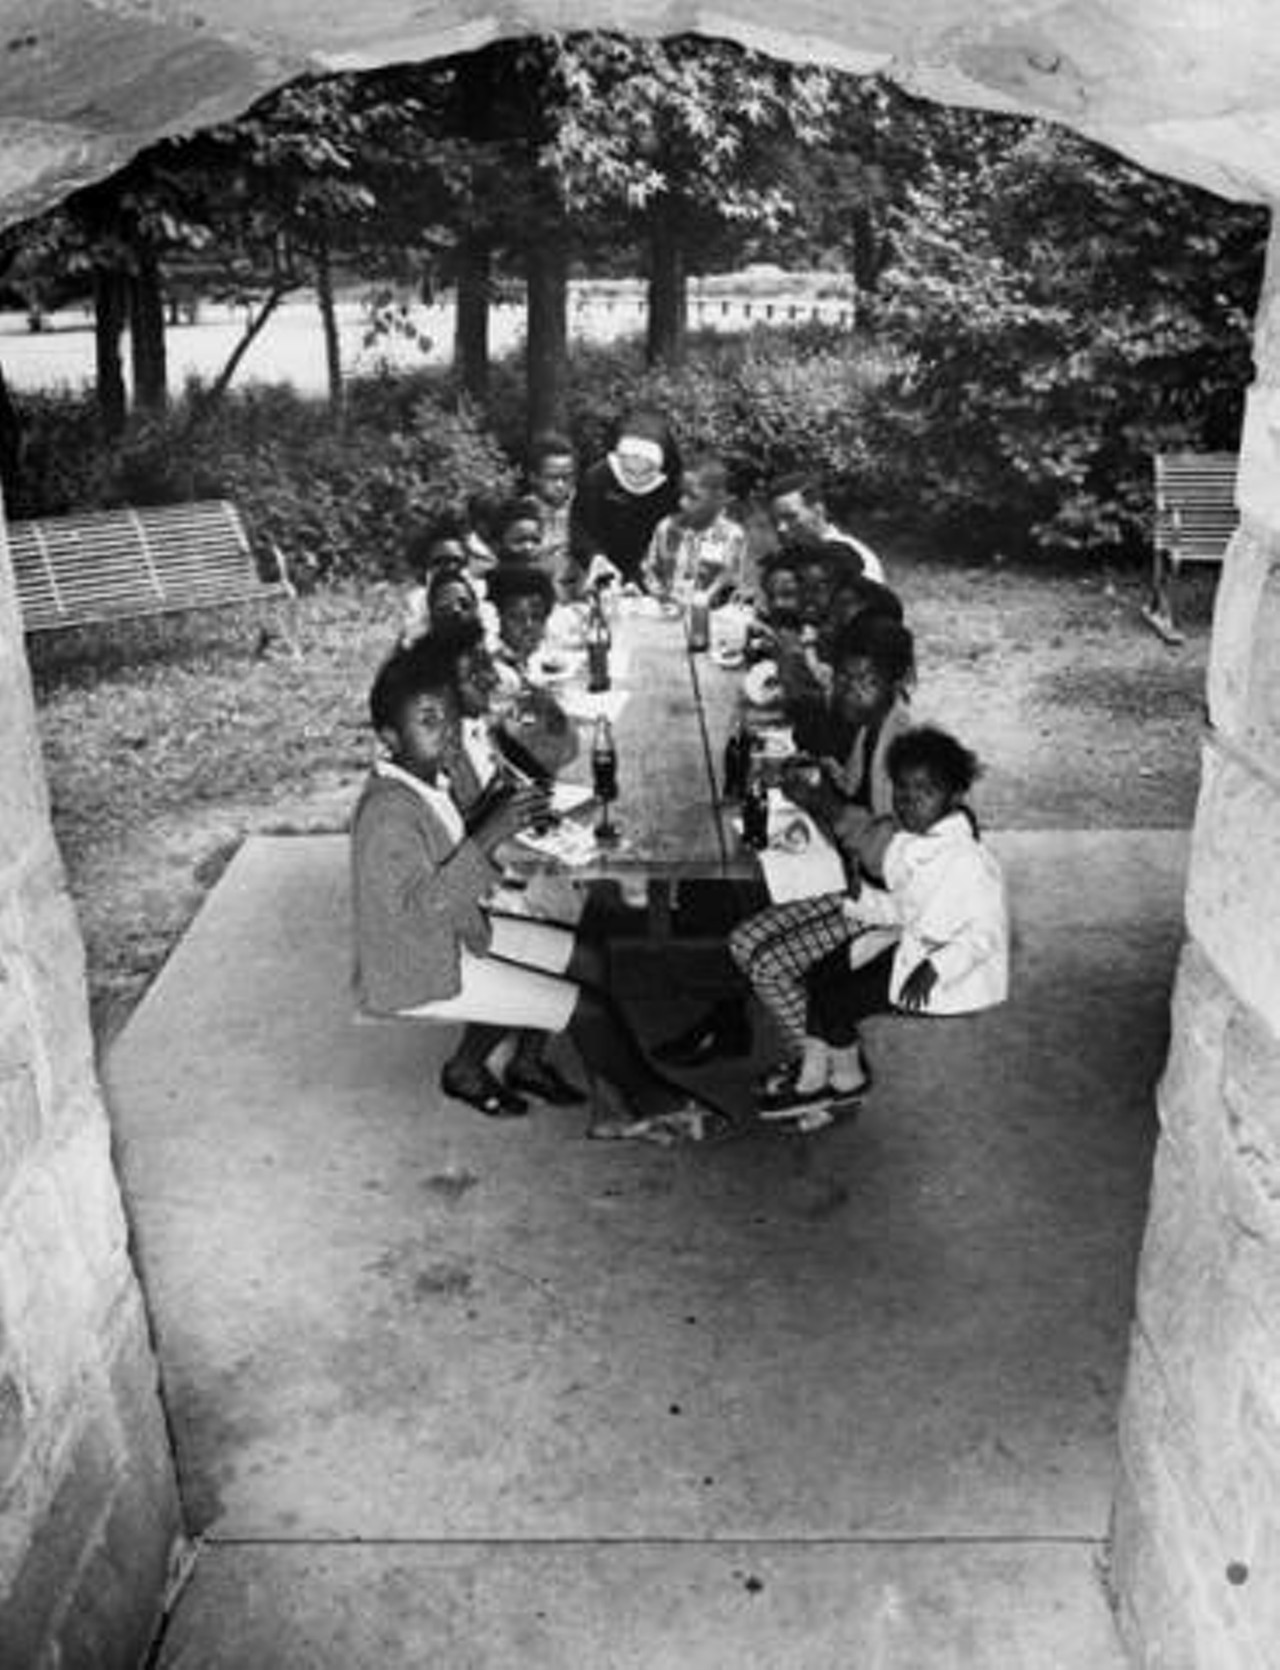 Lunch time and a scenic view for neighborhood youngsters at Oak Grove Picnic Area, Brecksville Reservation. Sister Clarita is assisting. 1968